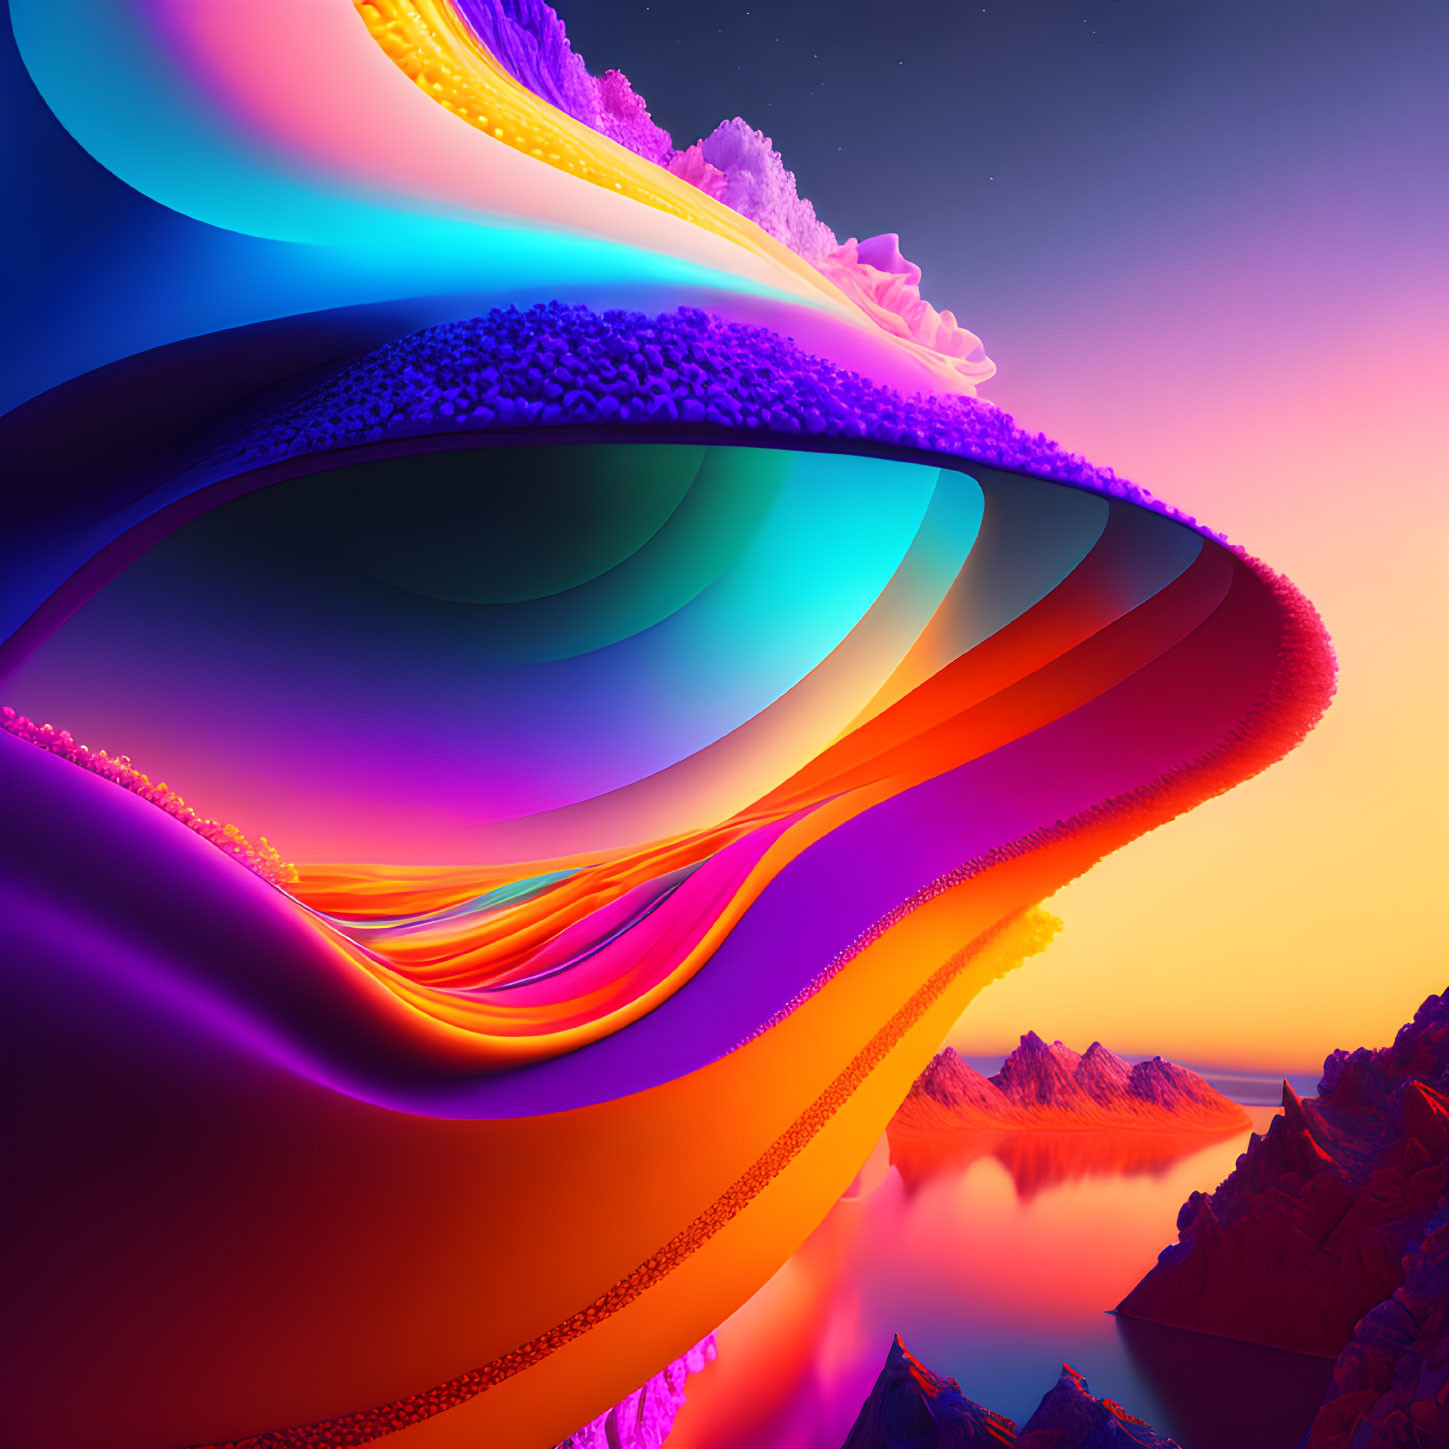 Colorful digital artwork: layered curves in orange, purple, and blue hues over tranquil water and mountain